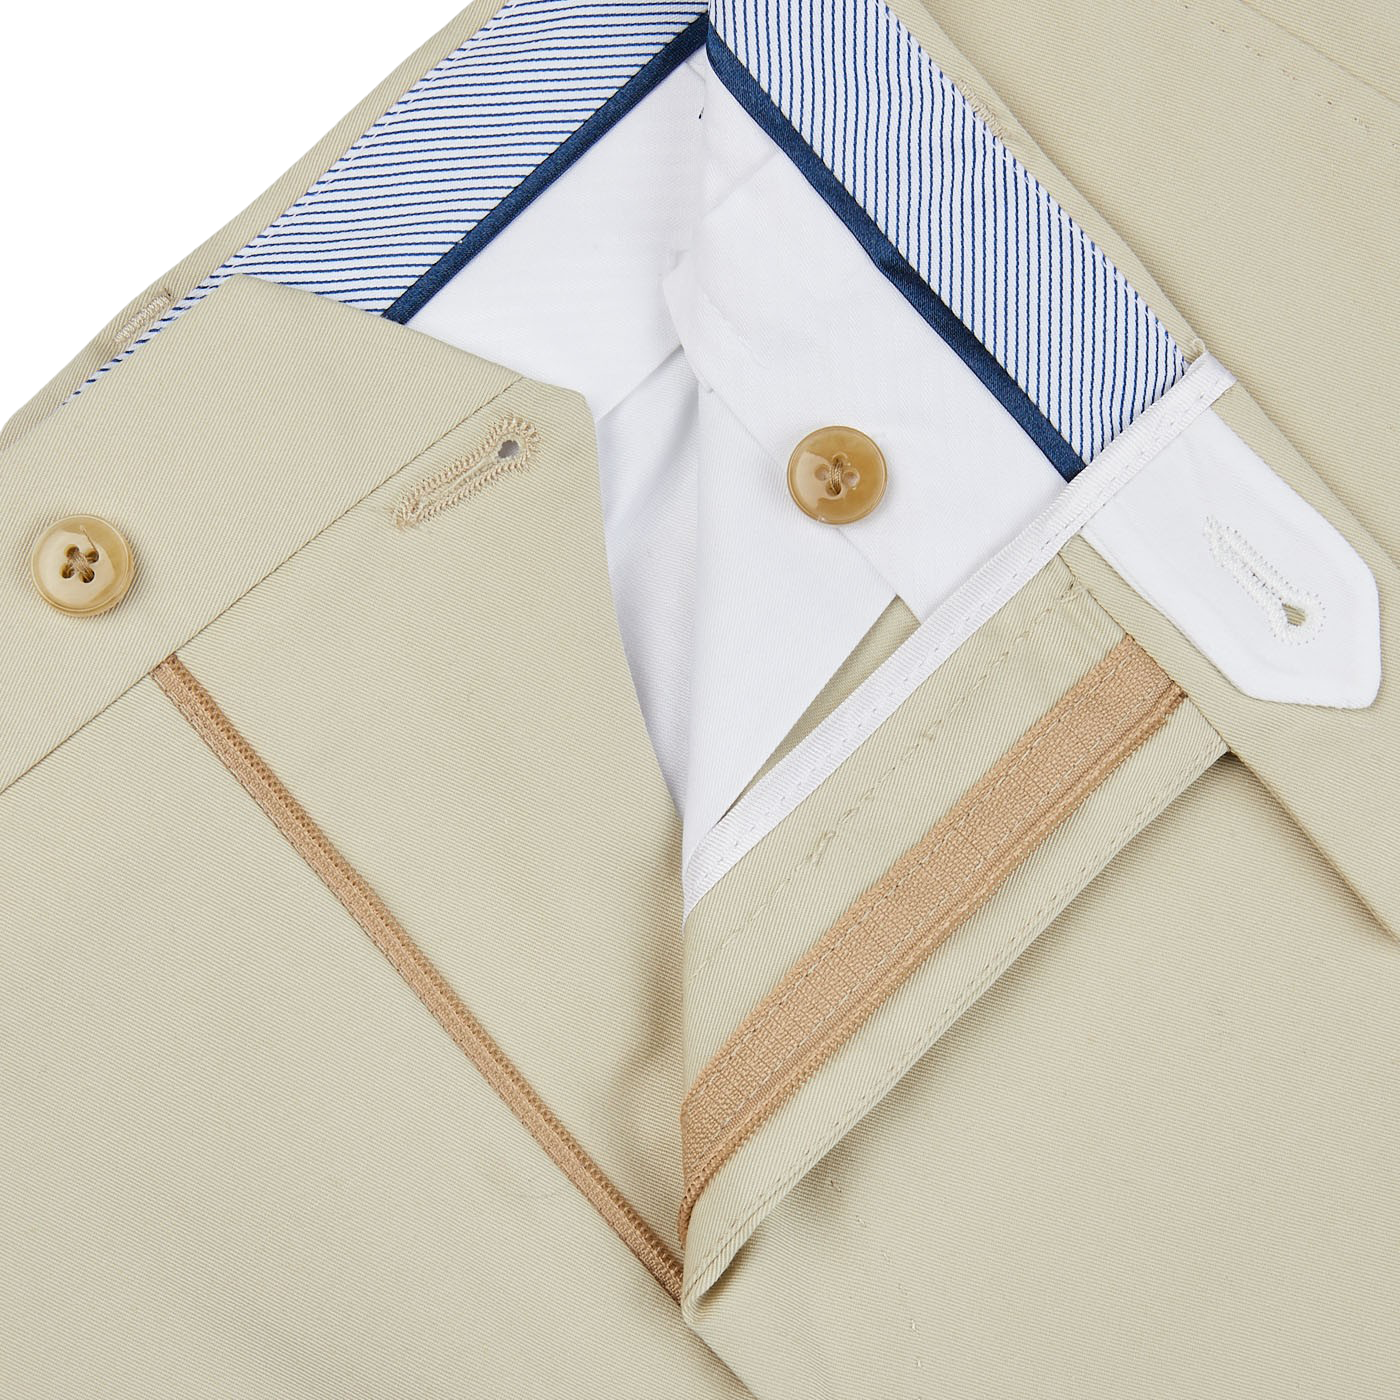 A close up view of a pair of Light Beige Cotton Twill Flat Front Trousers with blue and white stripes, made by Luigi Bianchi, in regular fit.